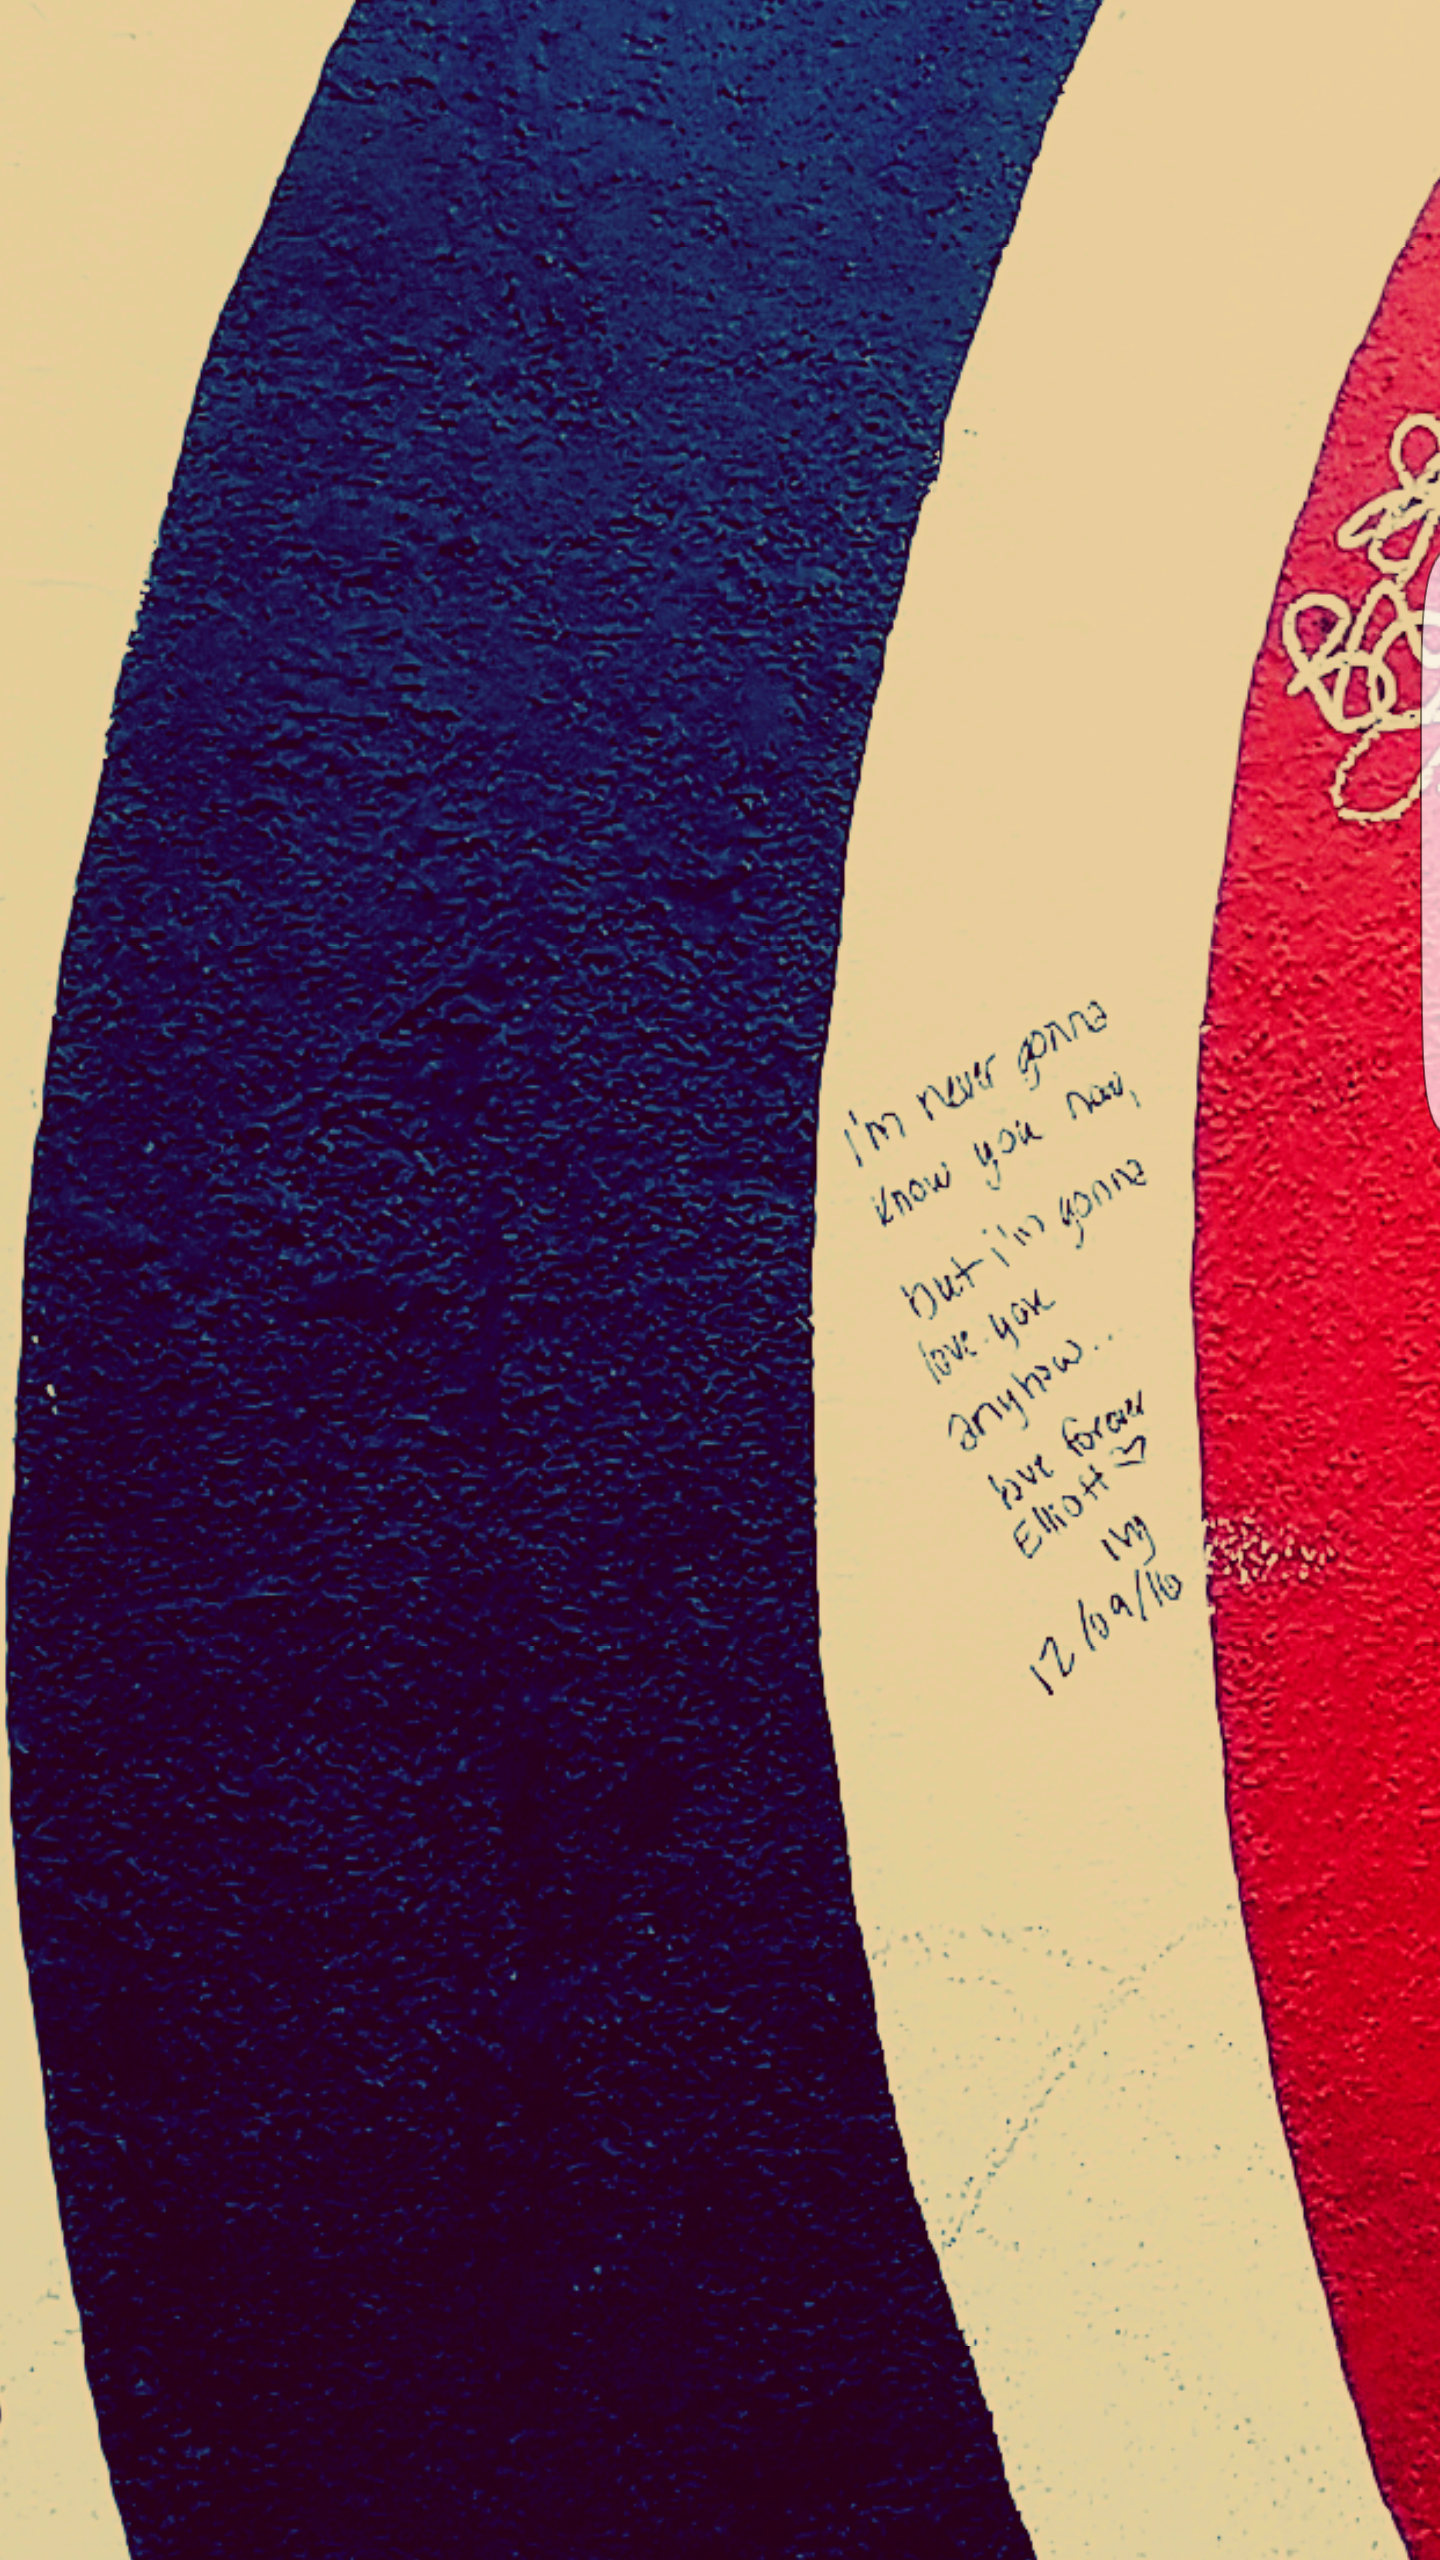 Note I found on the Elliott Smith wall that I thought made a nice phone wallpaper